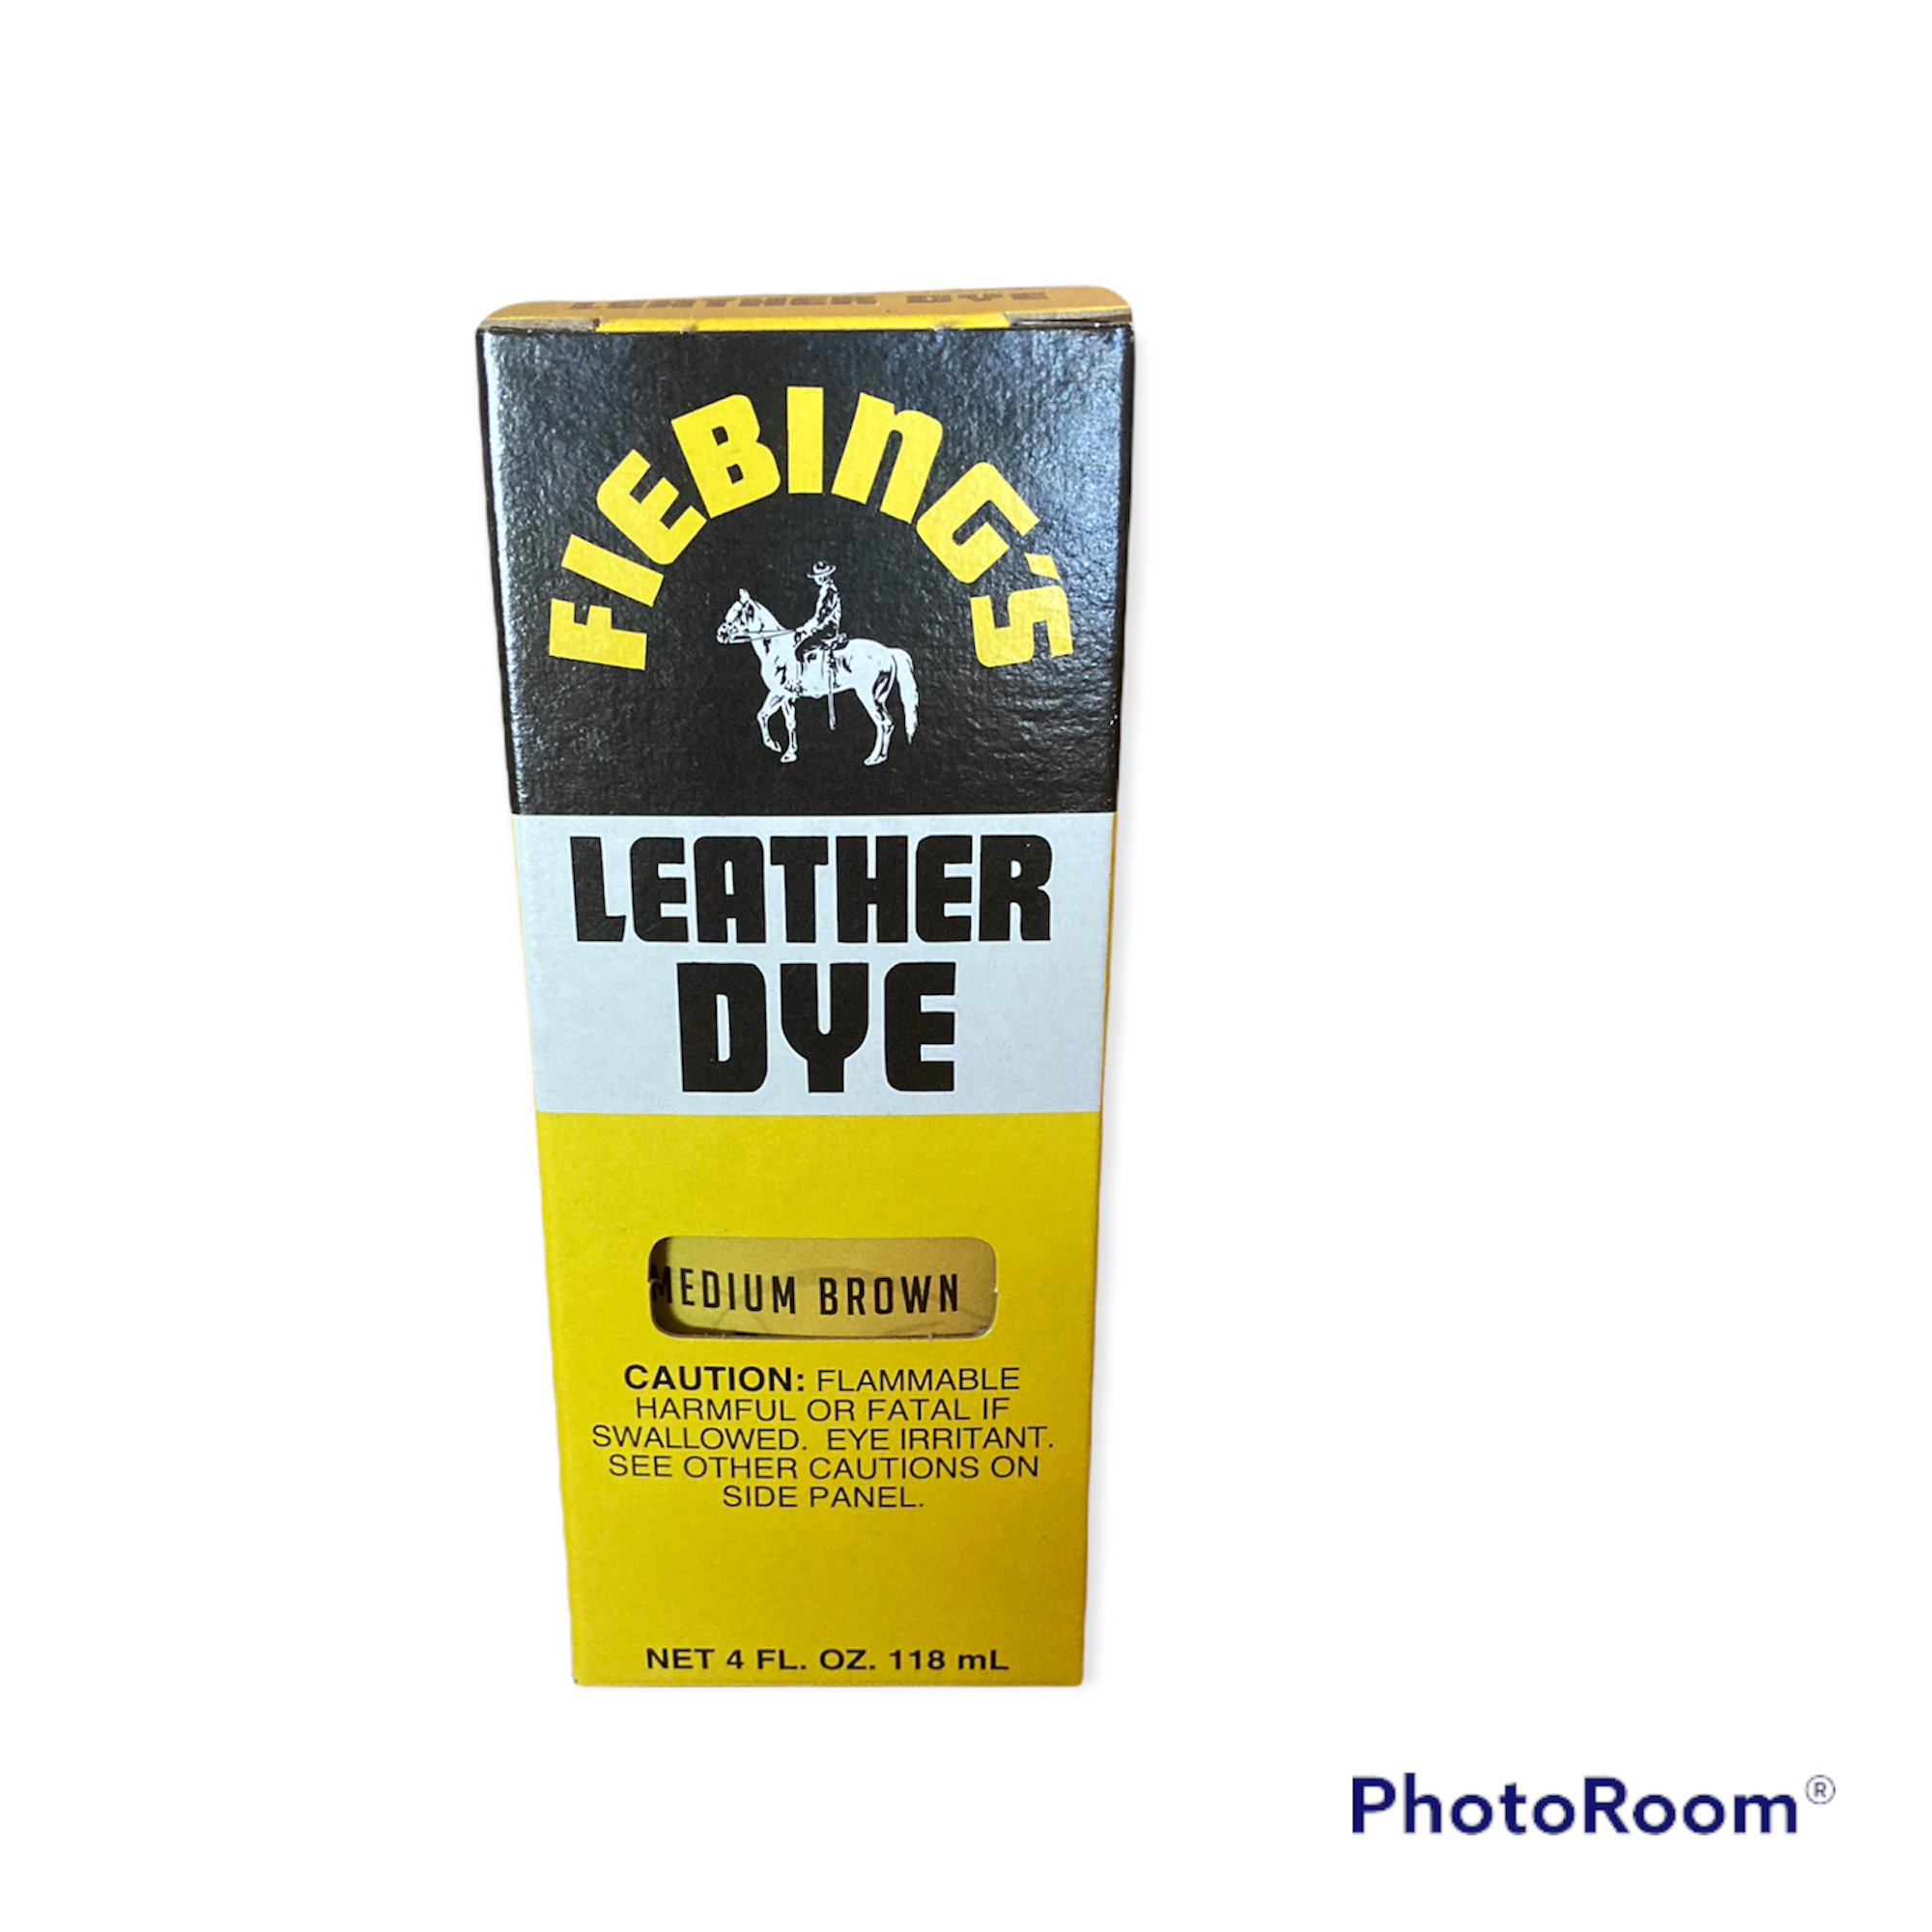 Fiebing's Leather Dye: the World's Best Smooth Leather Dye ☆